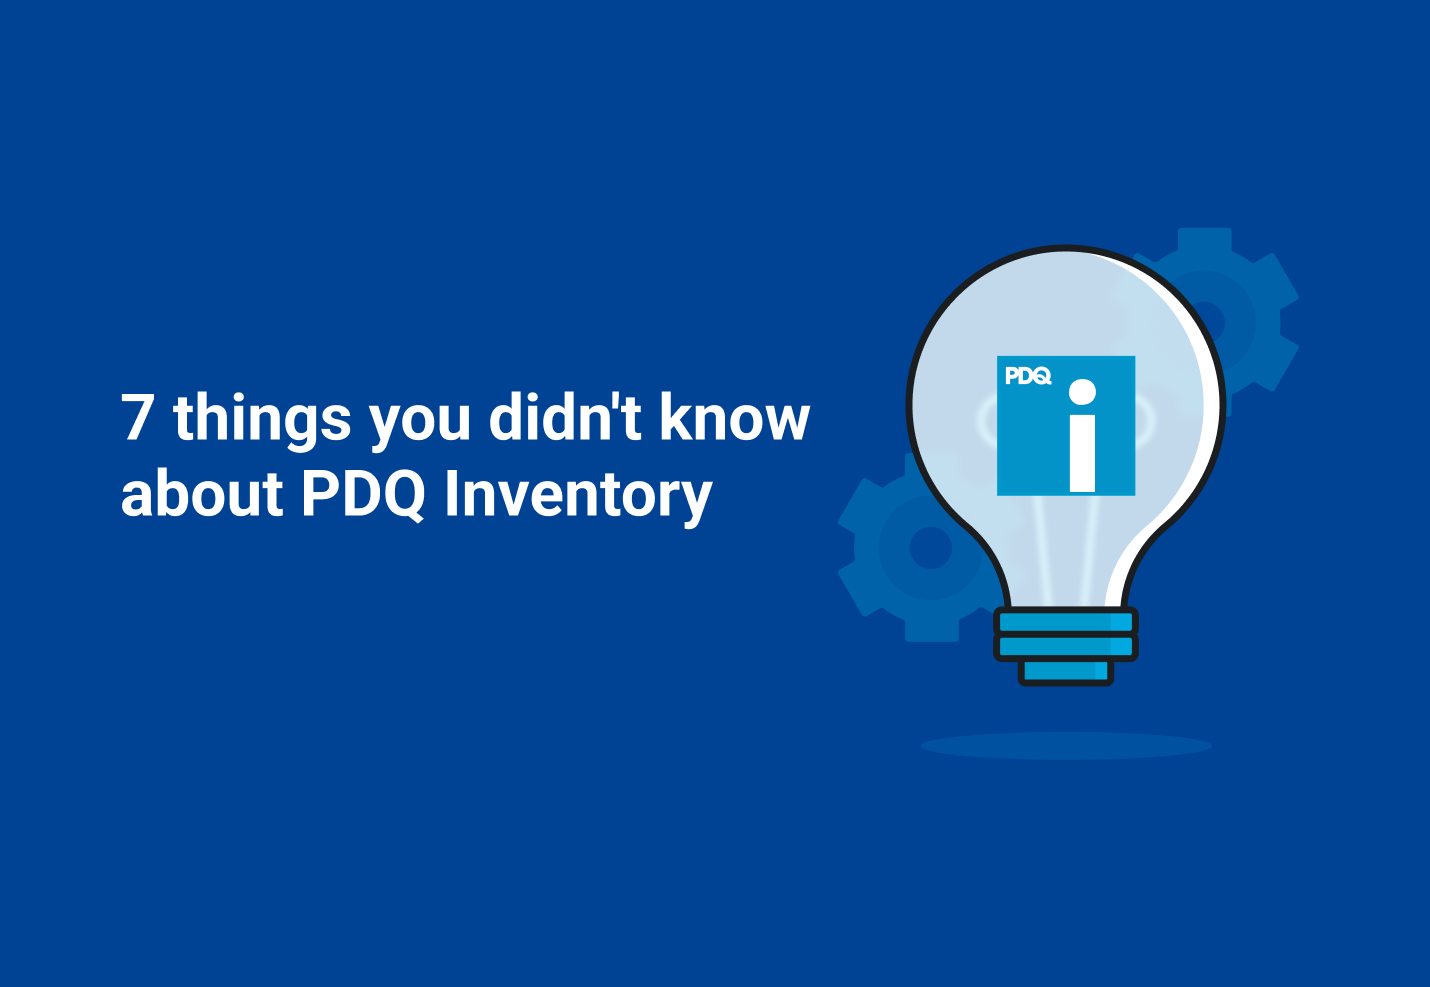 7 things you did not know about pdq inventory